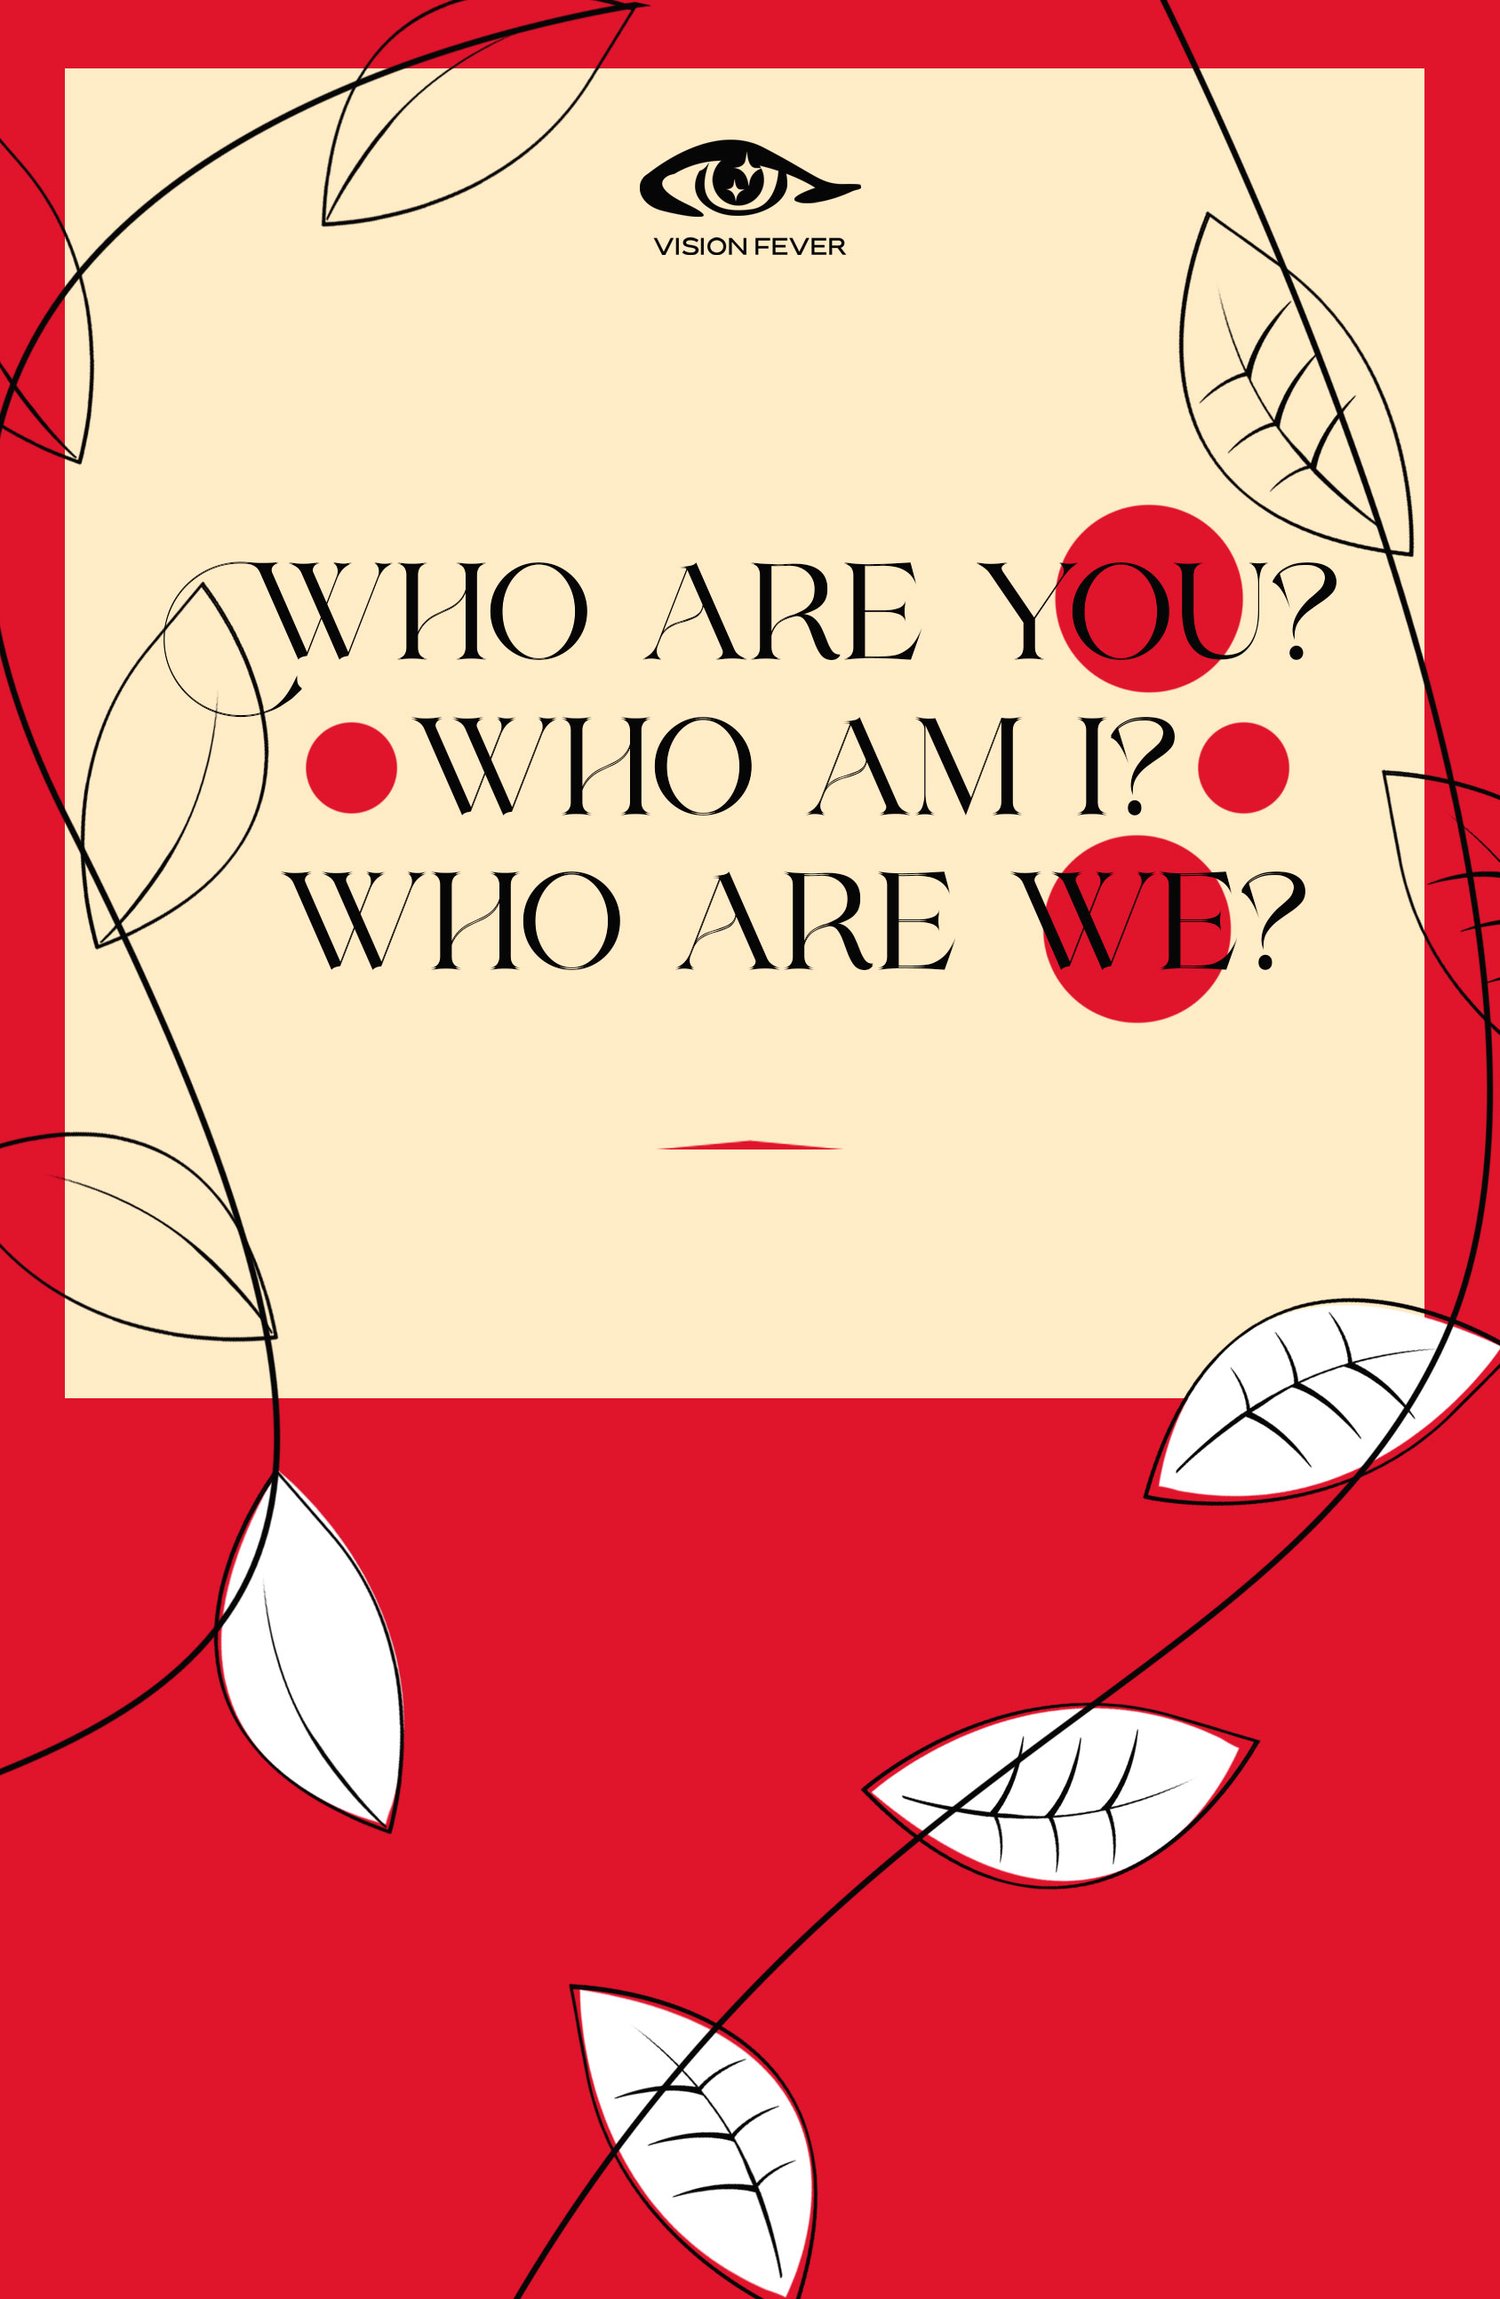 Who are you? Who am I? Who are we? Art Twitter Zine